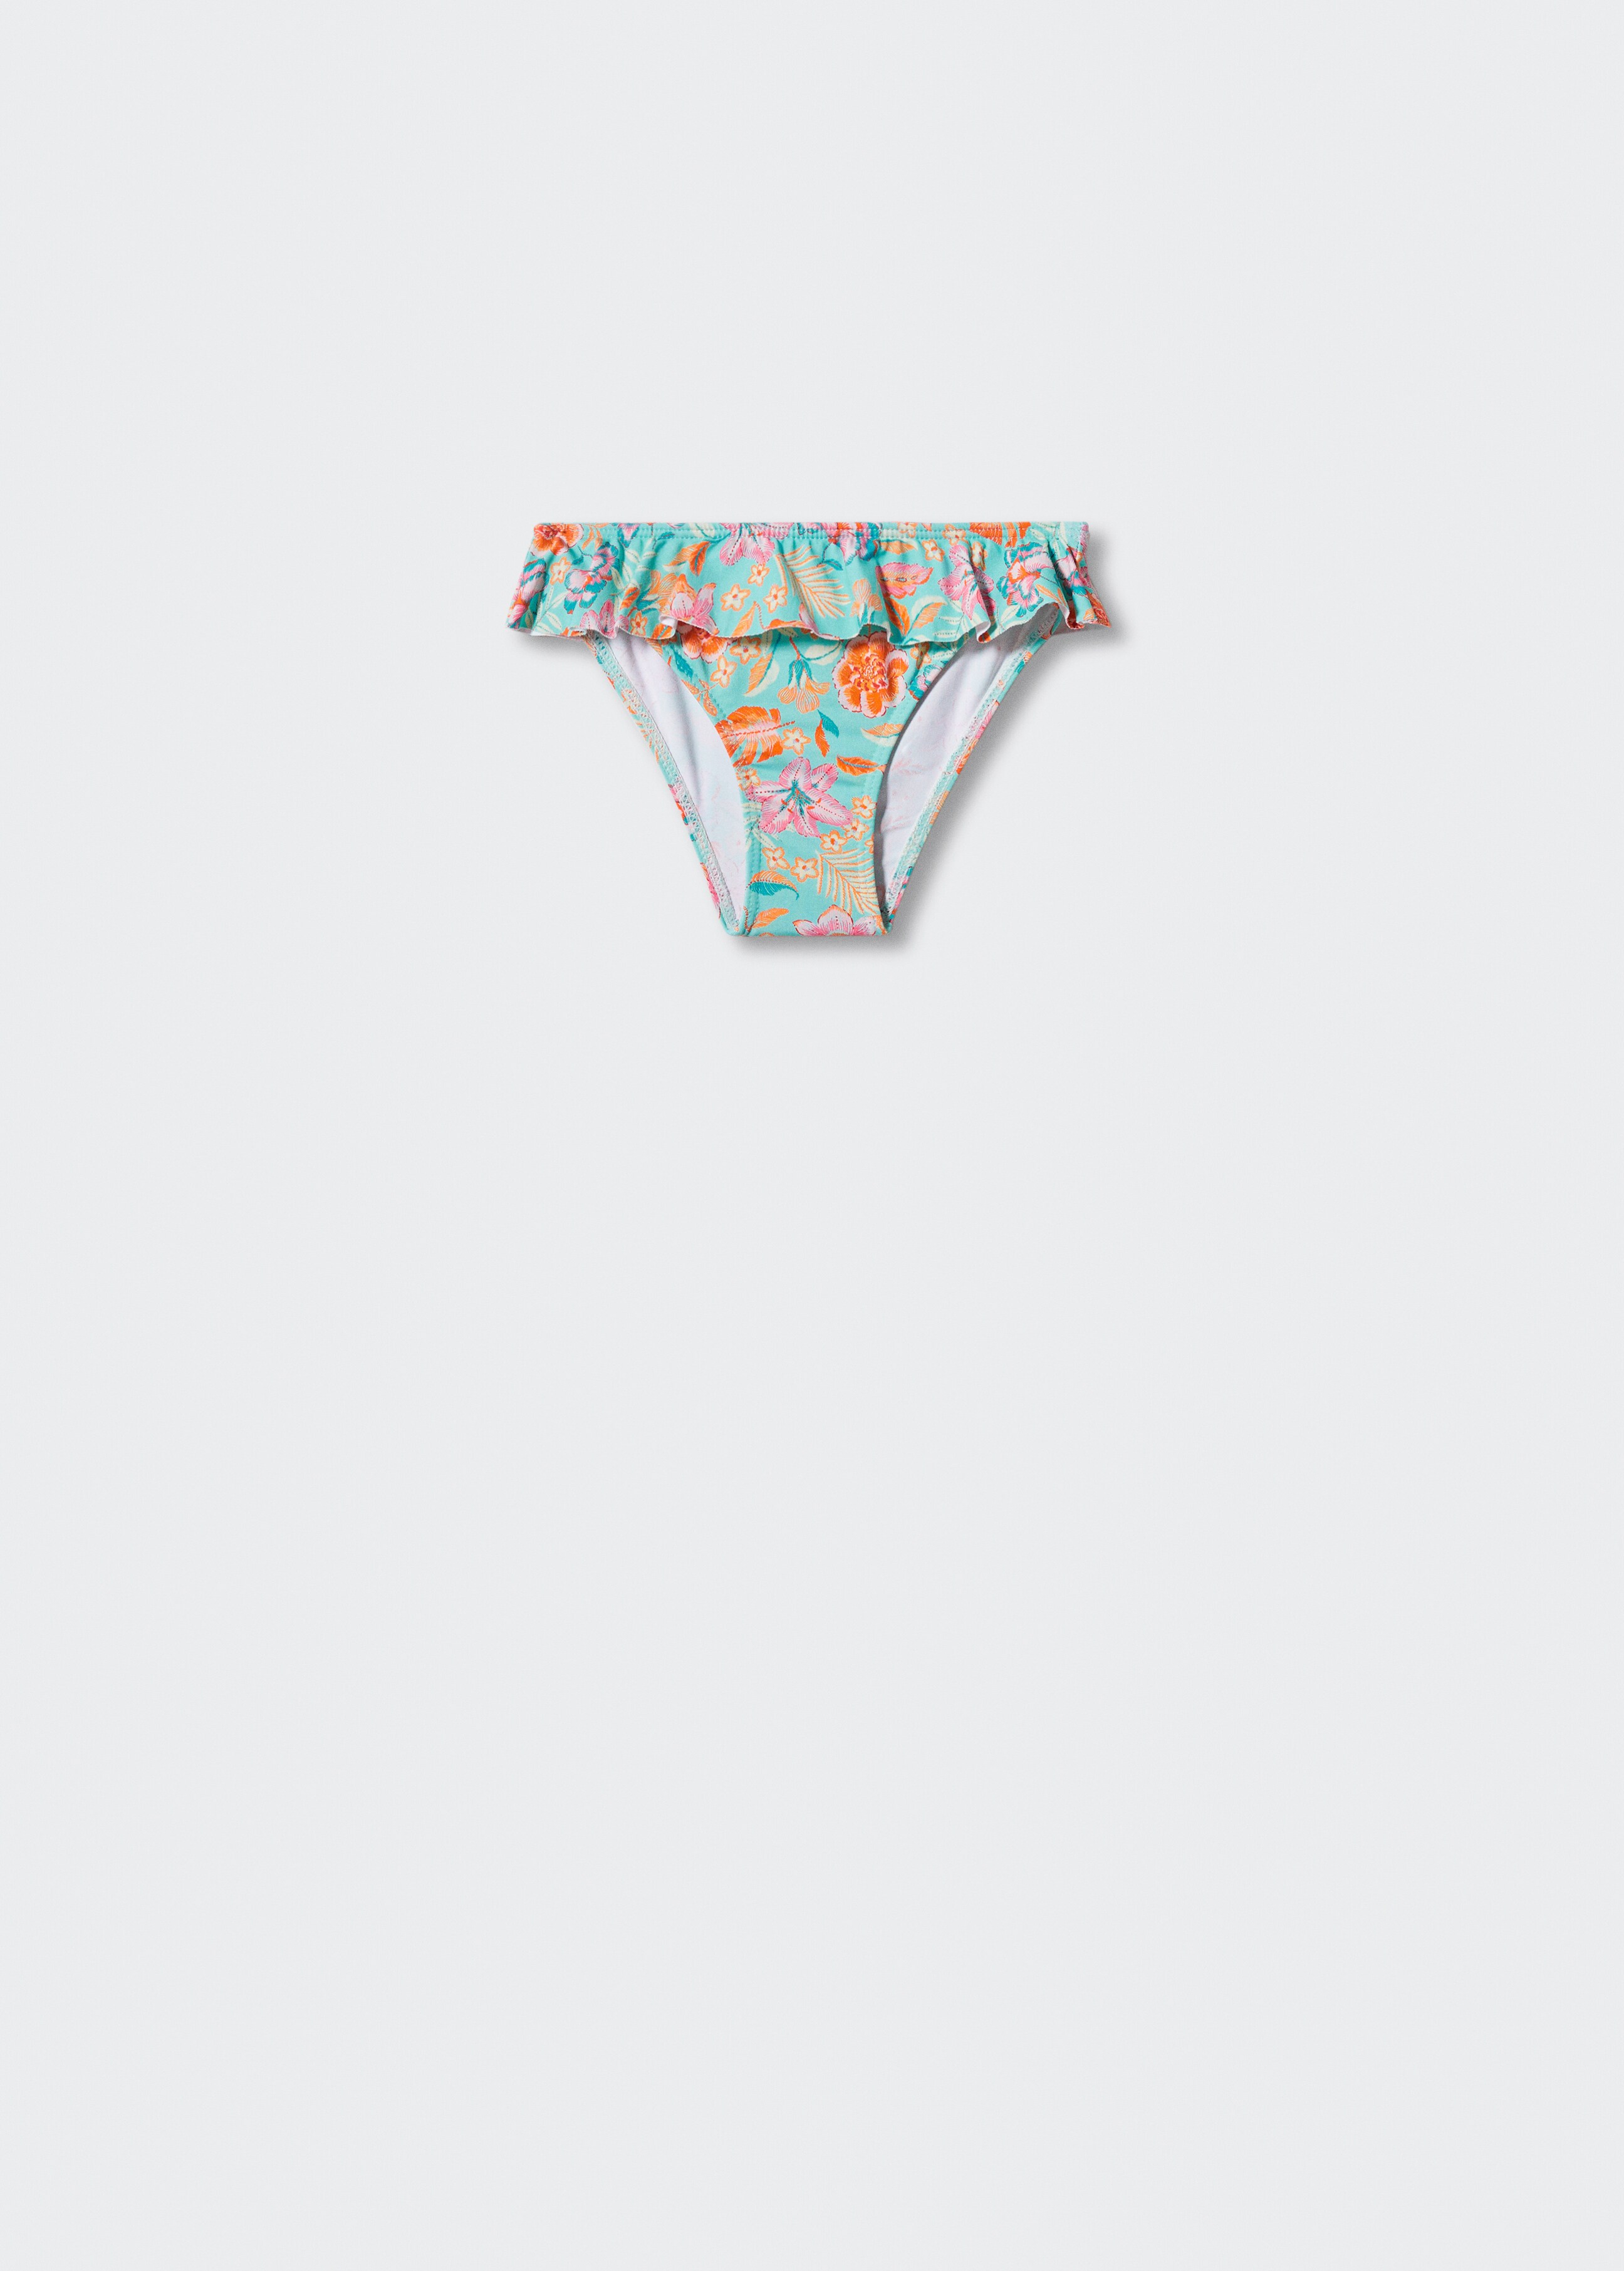 Floral bikini bottom - Article without model